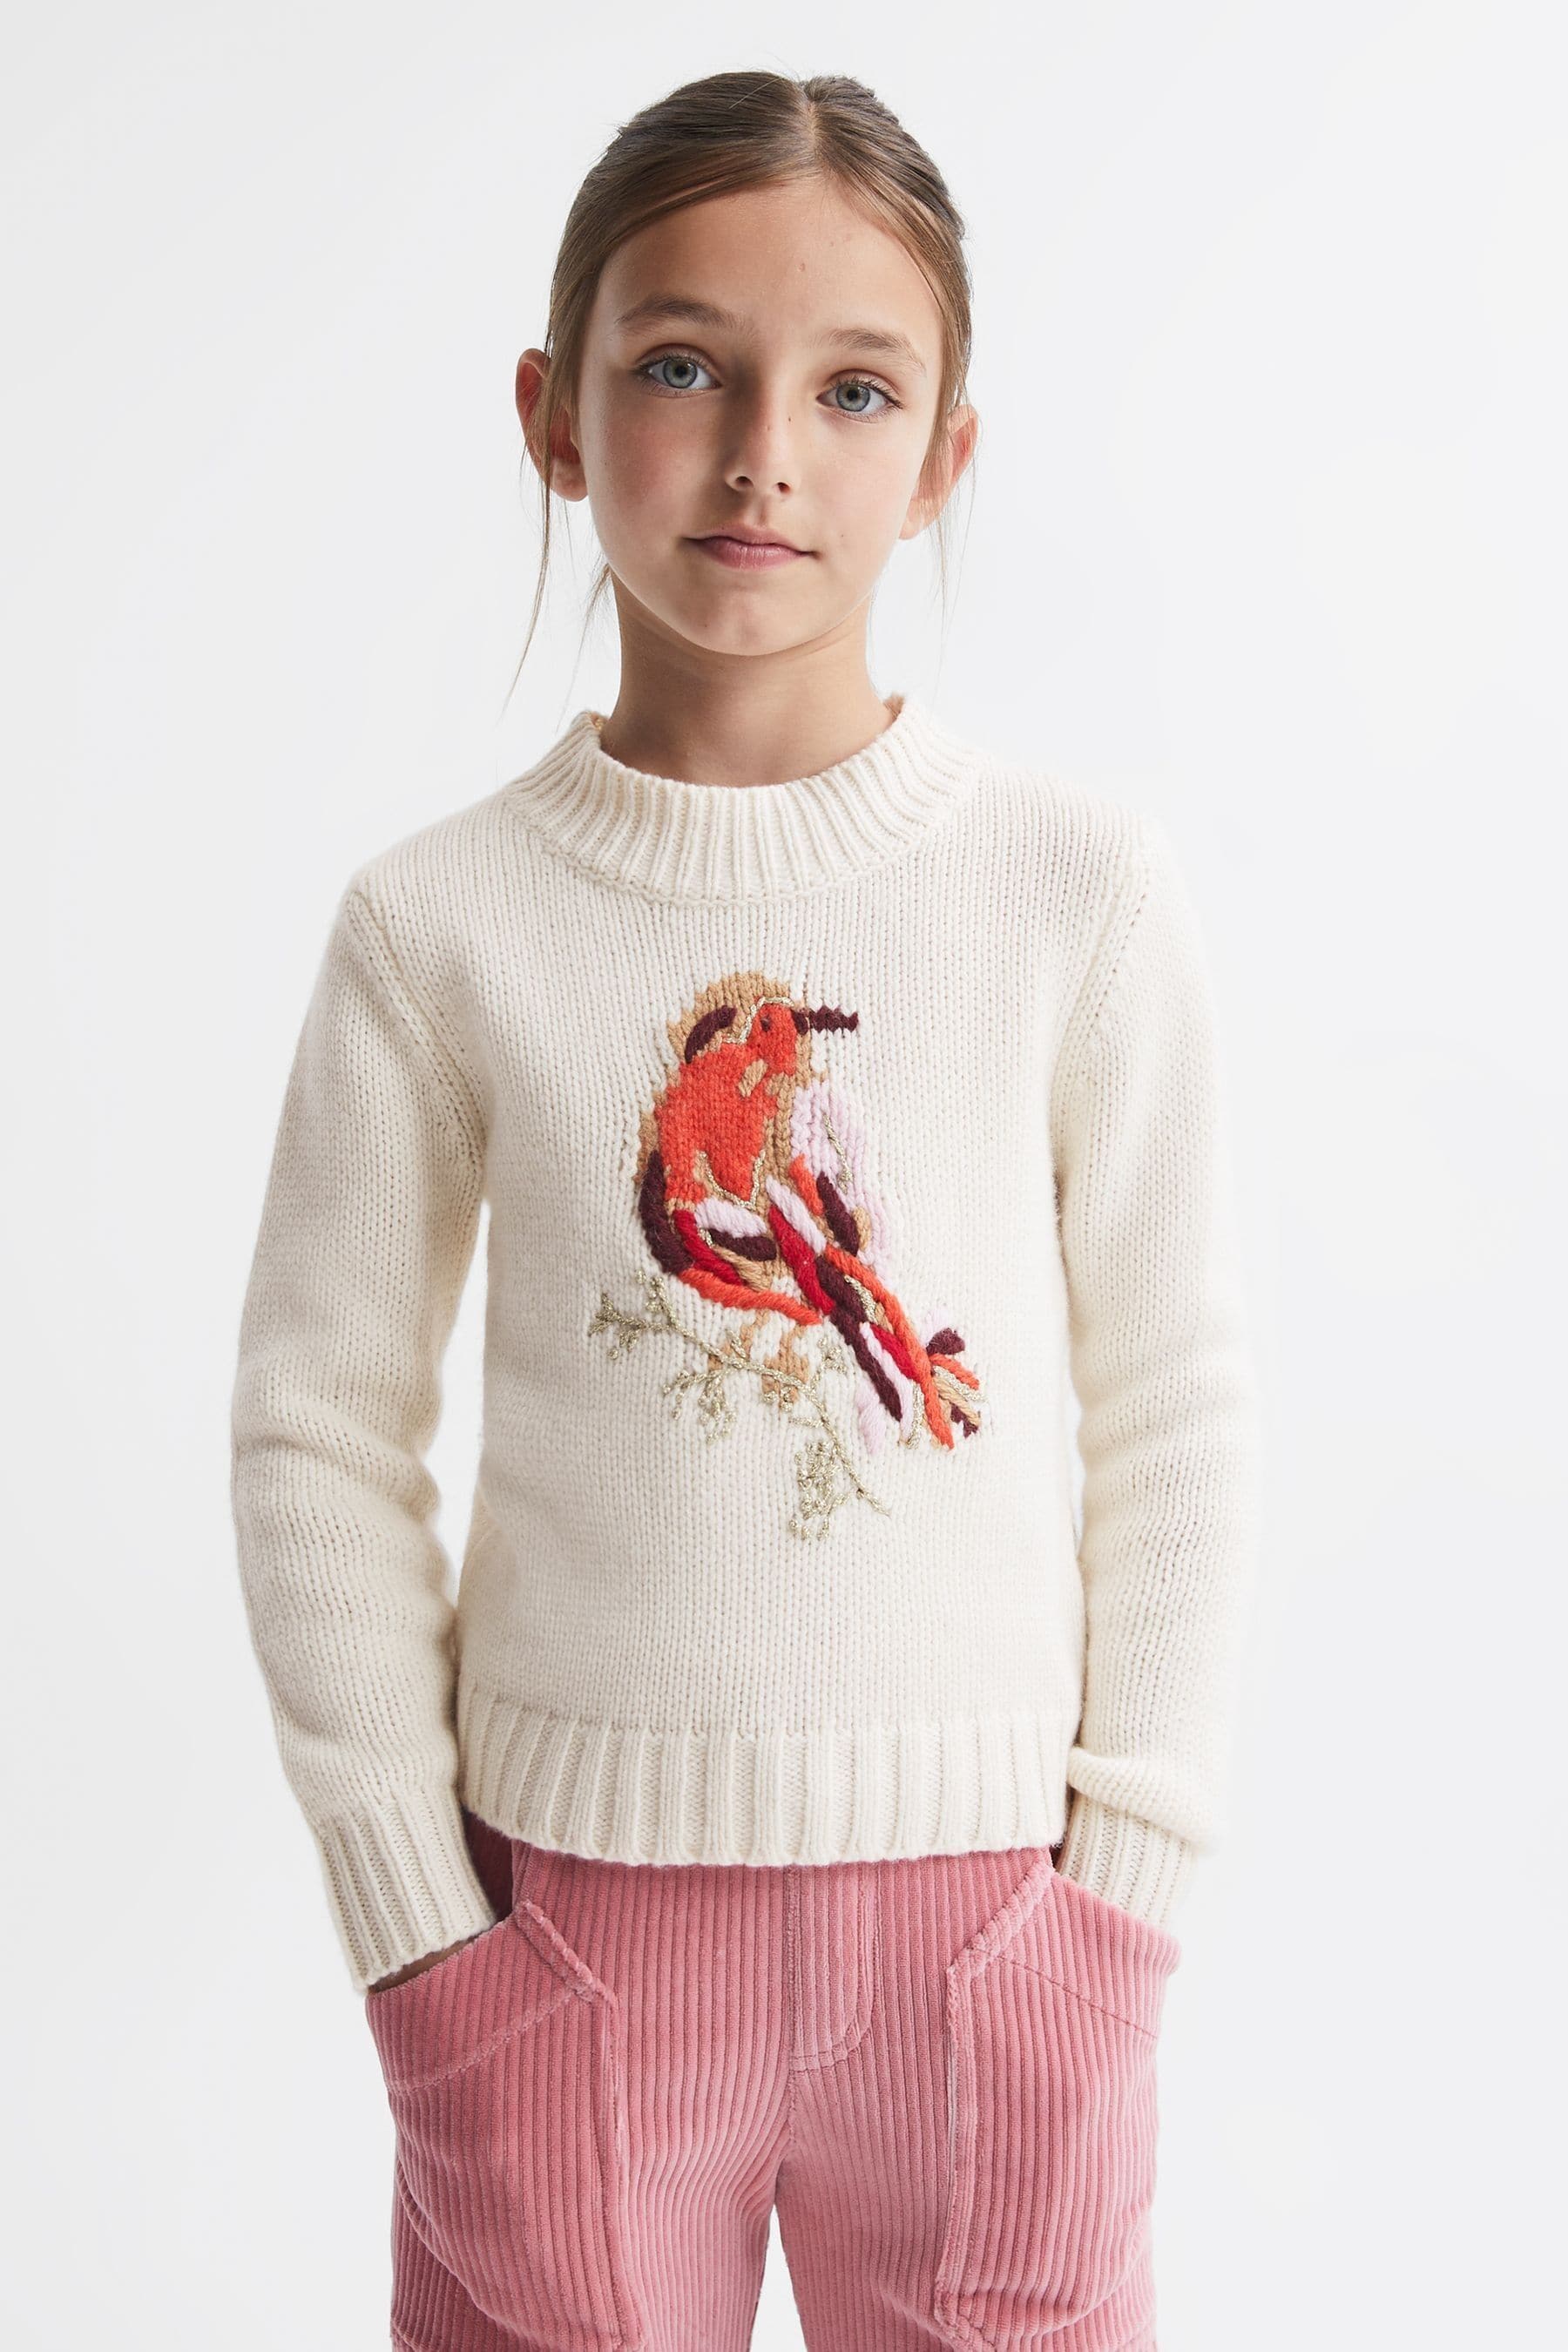 Reiss Kids' River - Ivory Junior Casual Knitted Robin Jumper, Age 8-9 Years